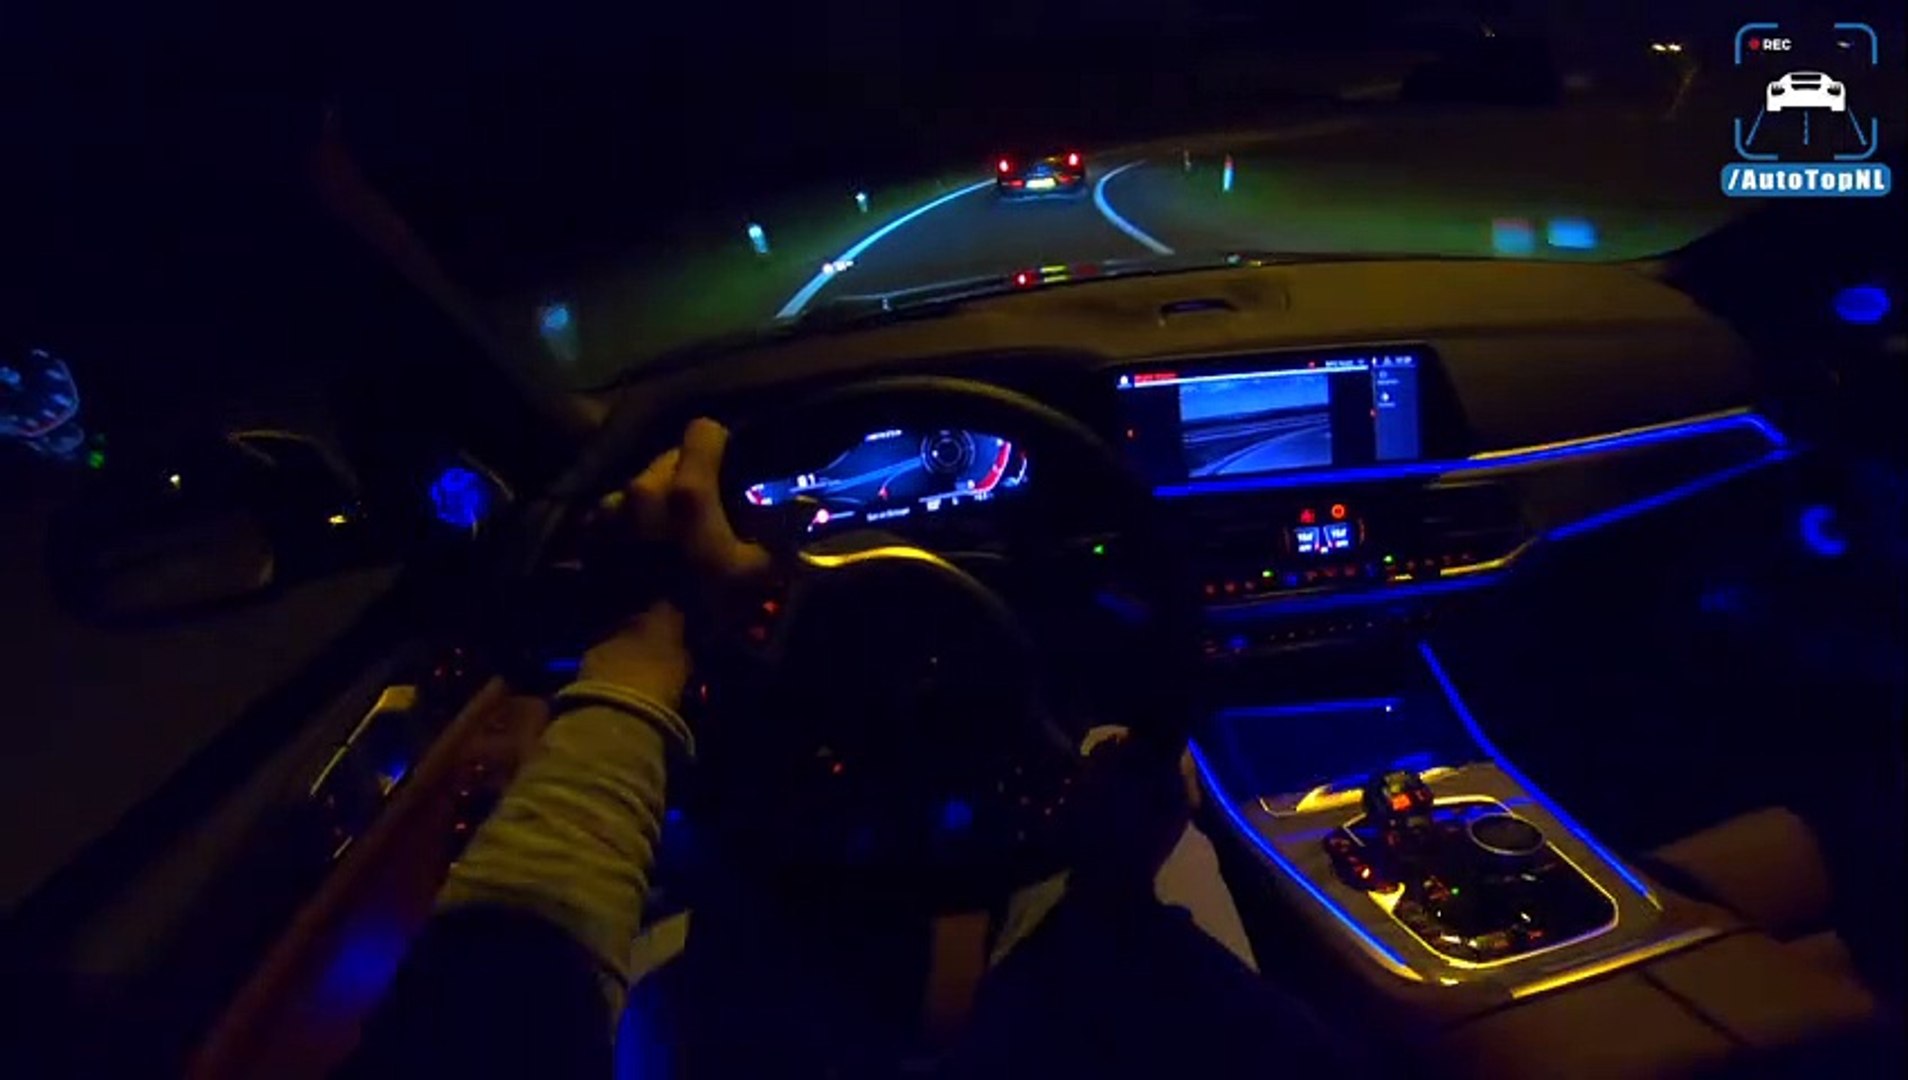 New Bmw X5 M50d G05 Night Drive Pov Ambient Lighting By Autotopnl